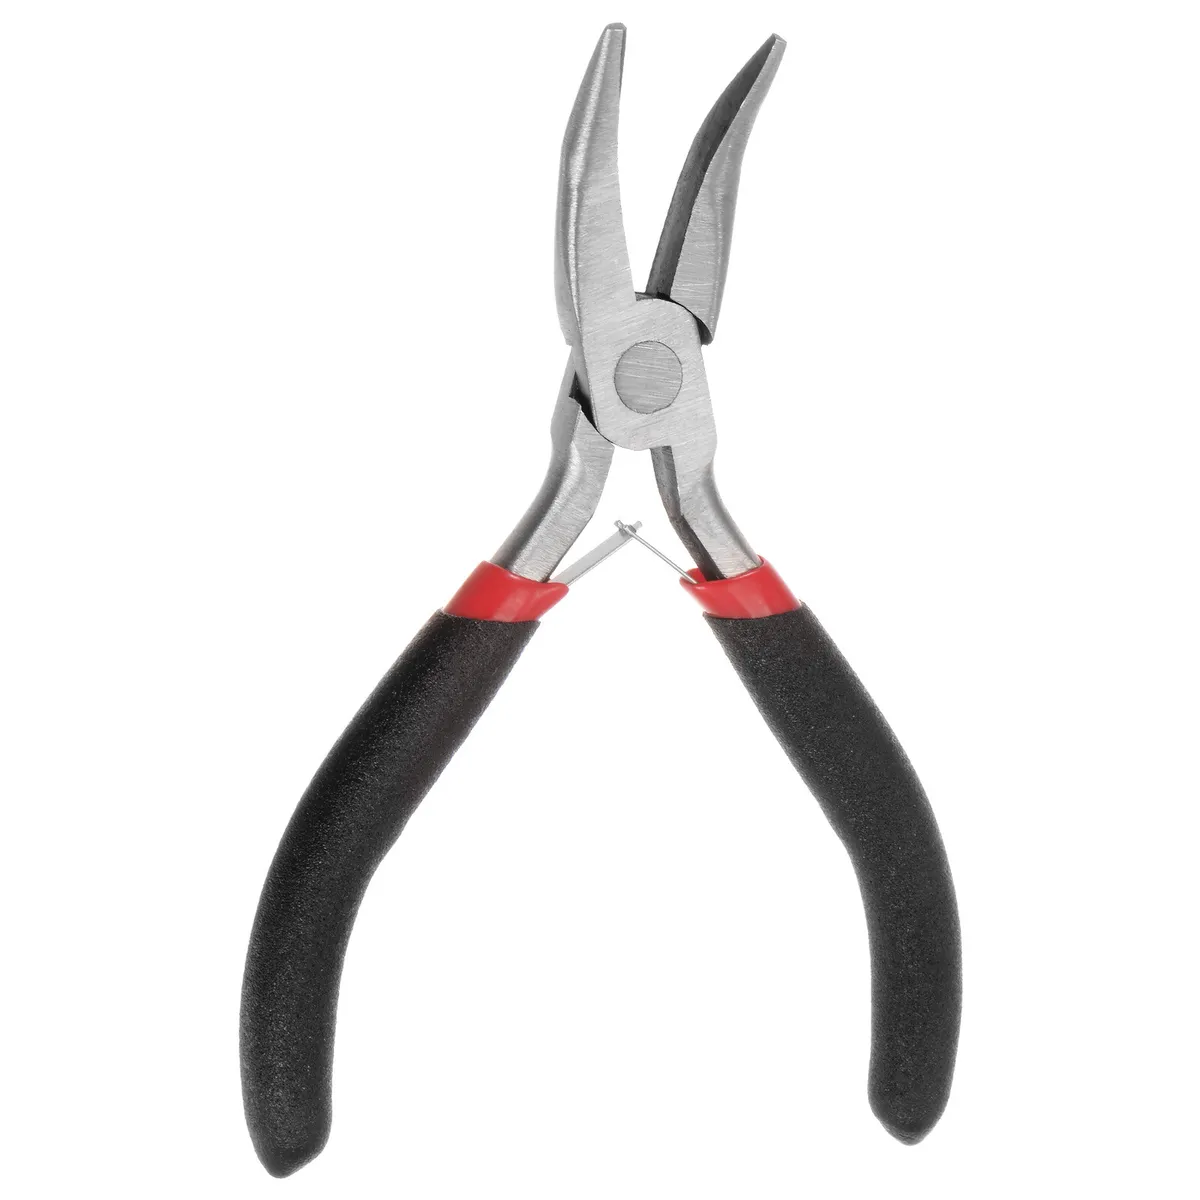 Mini Bent Nose Pliers 4.5 Toothless Curved Precision Plier with Black  Handle